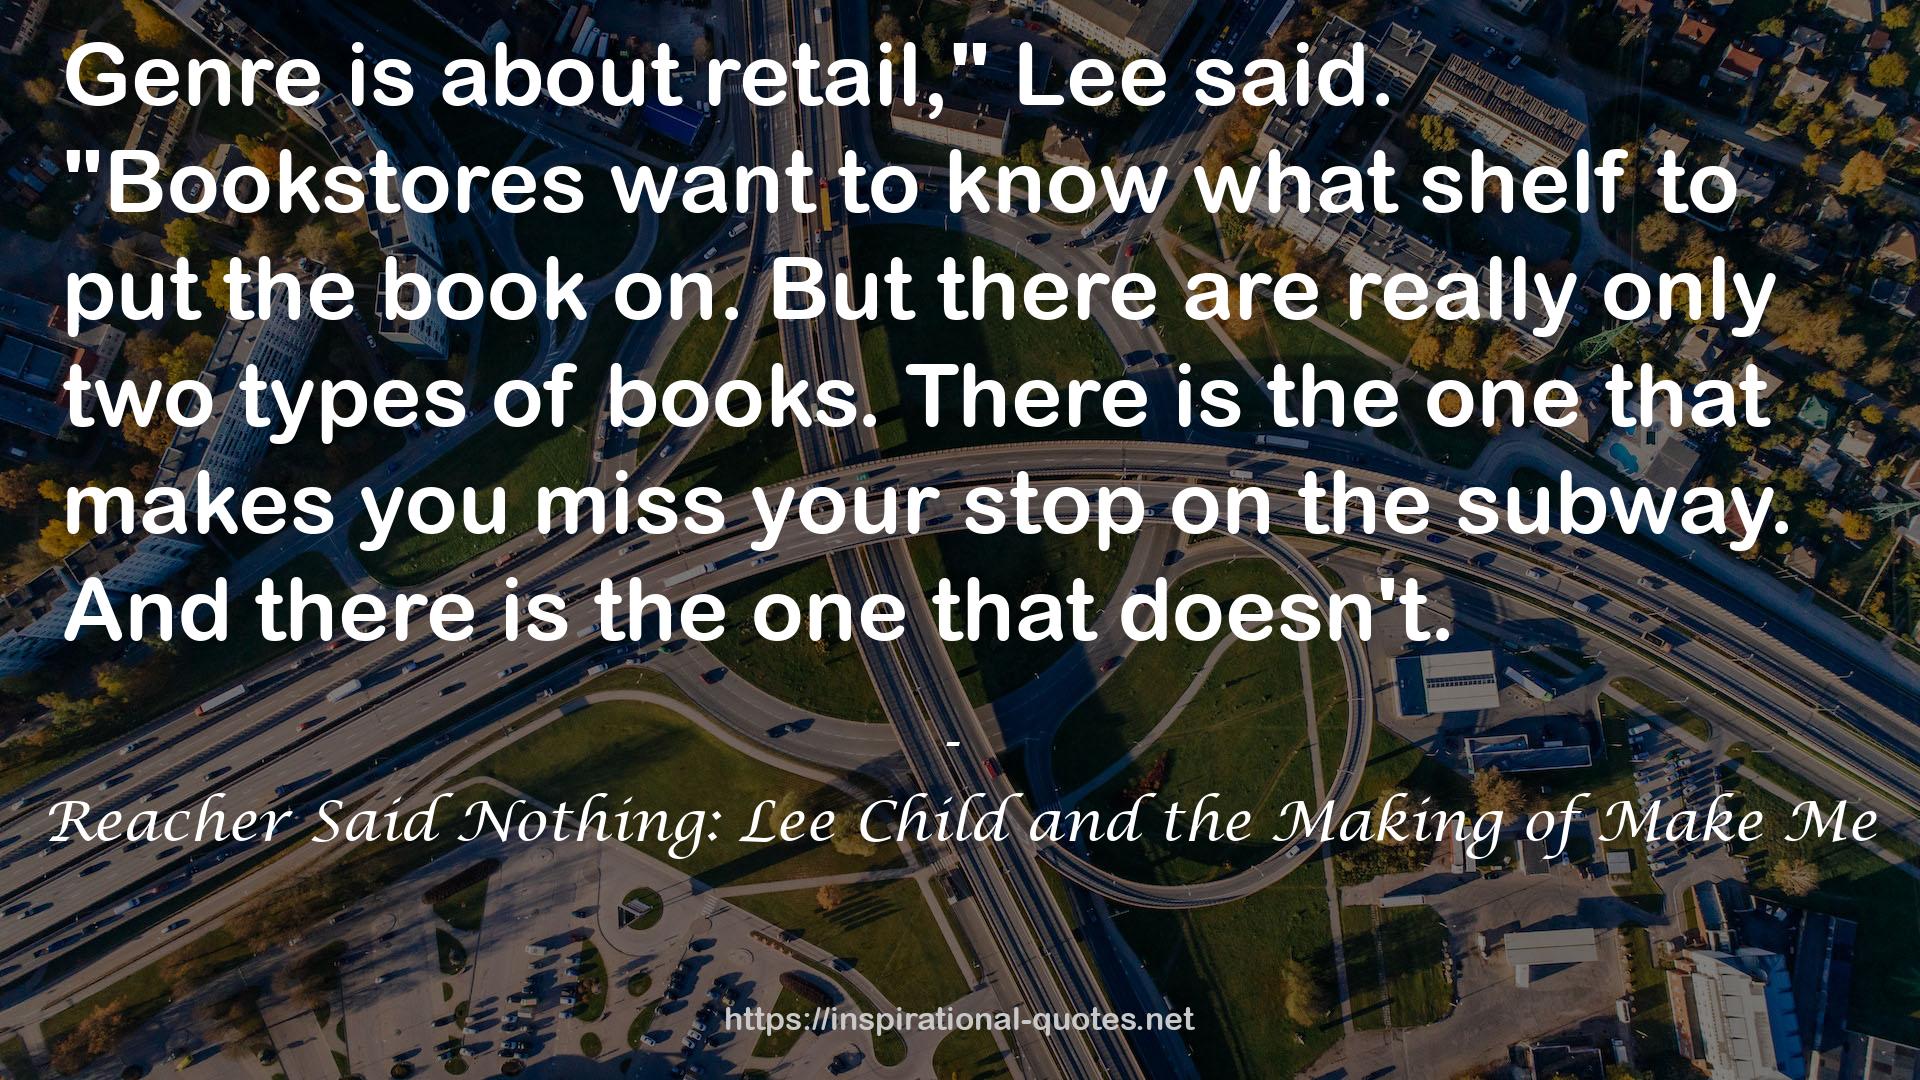 Reacher Said Nothing: Lee Child and the Making of Make Me QUOTES